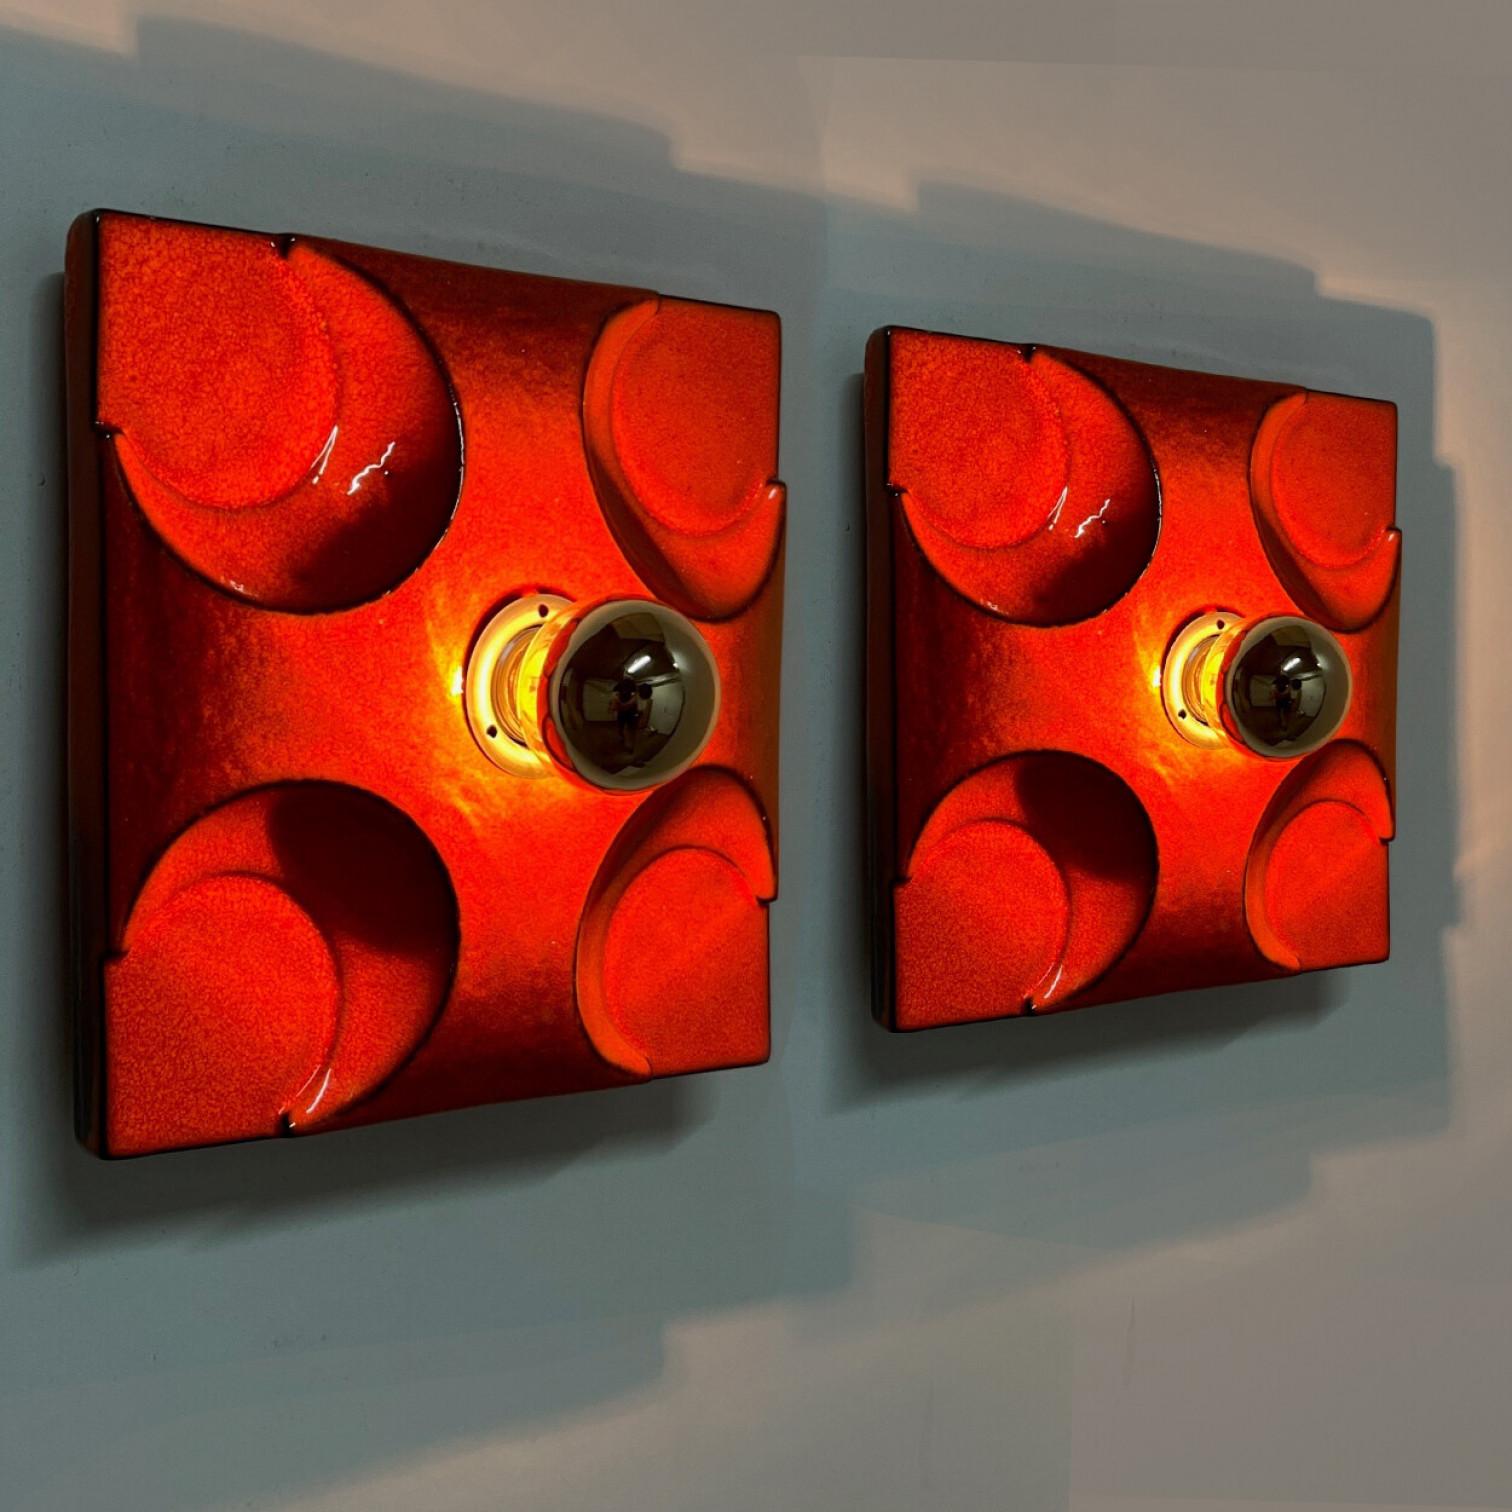 Space Age Pair of Orange Square Ceramic Wall Lights, Germany, 1970 For Sale